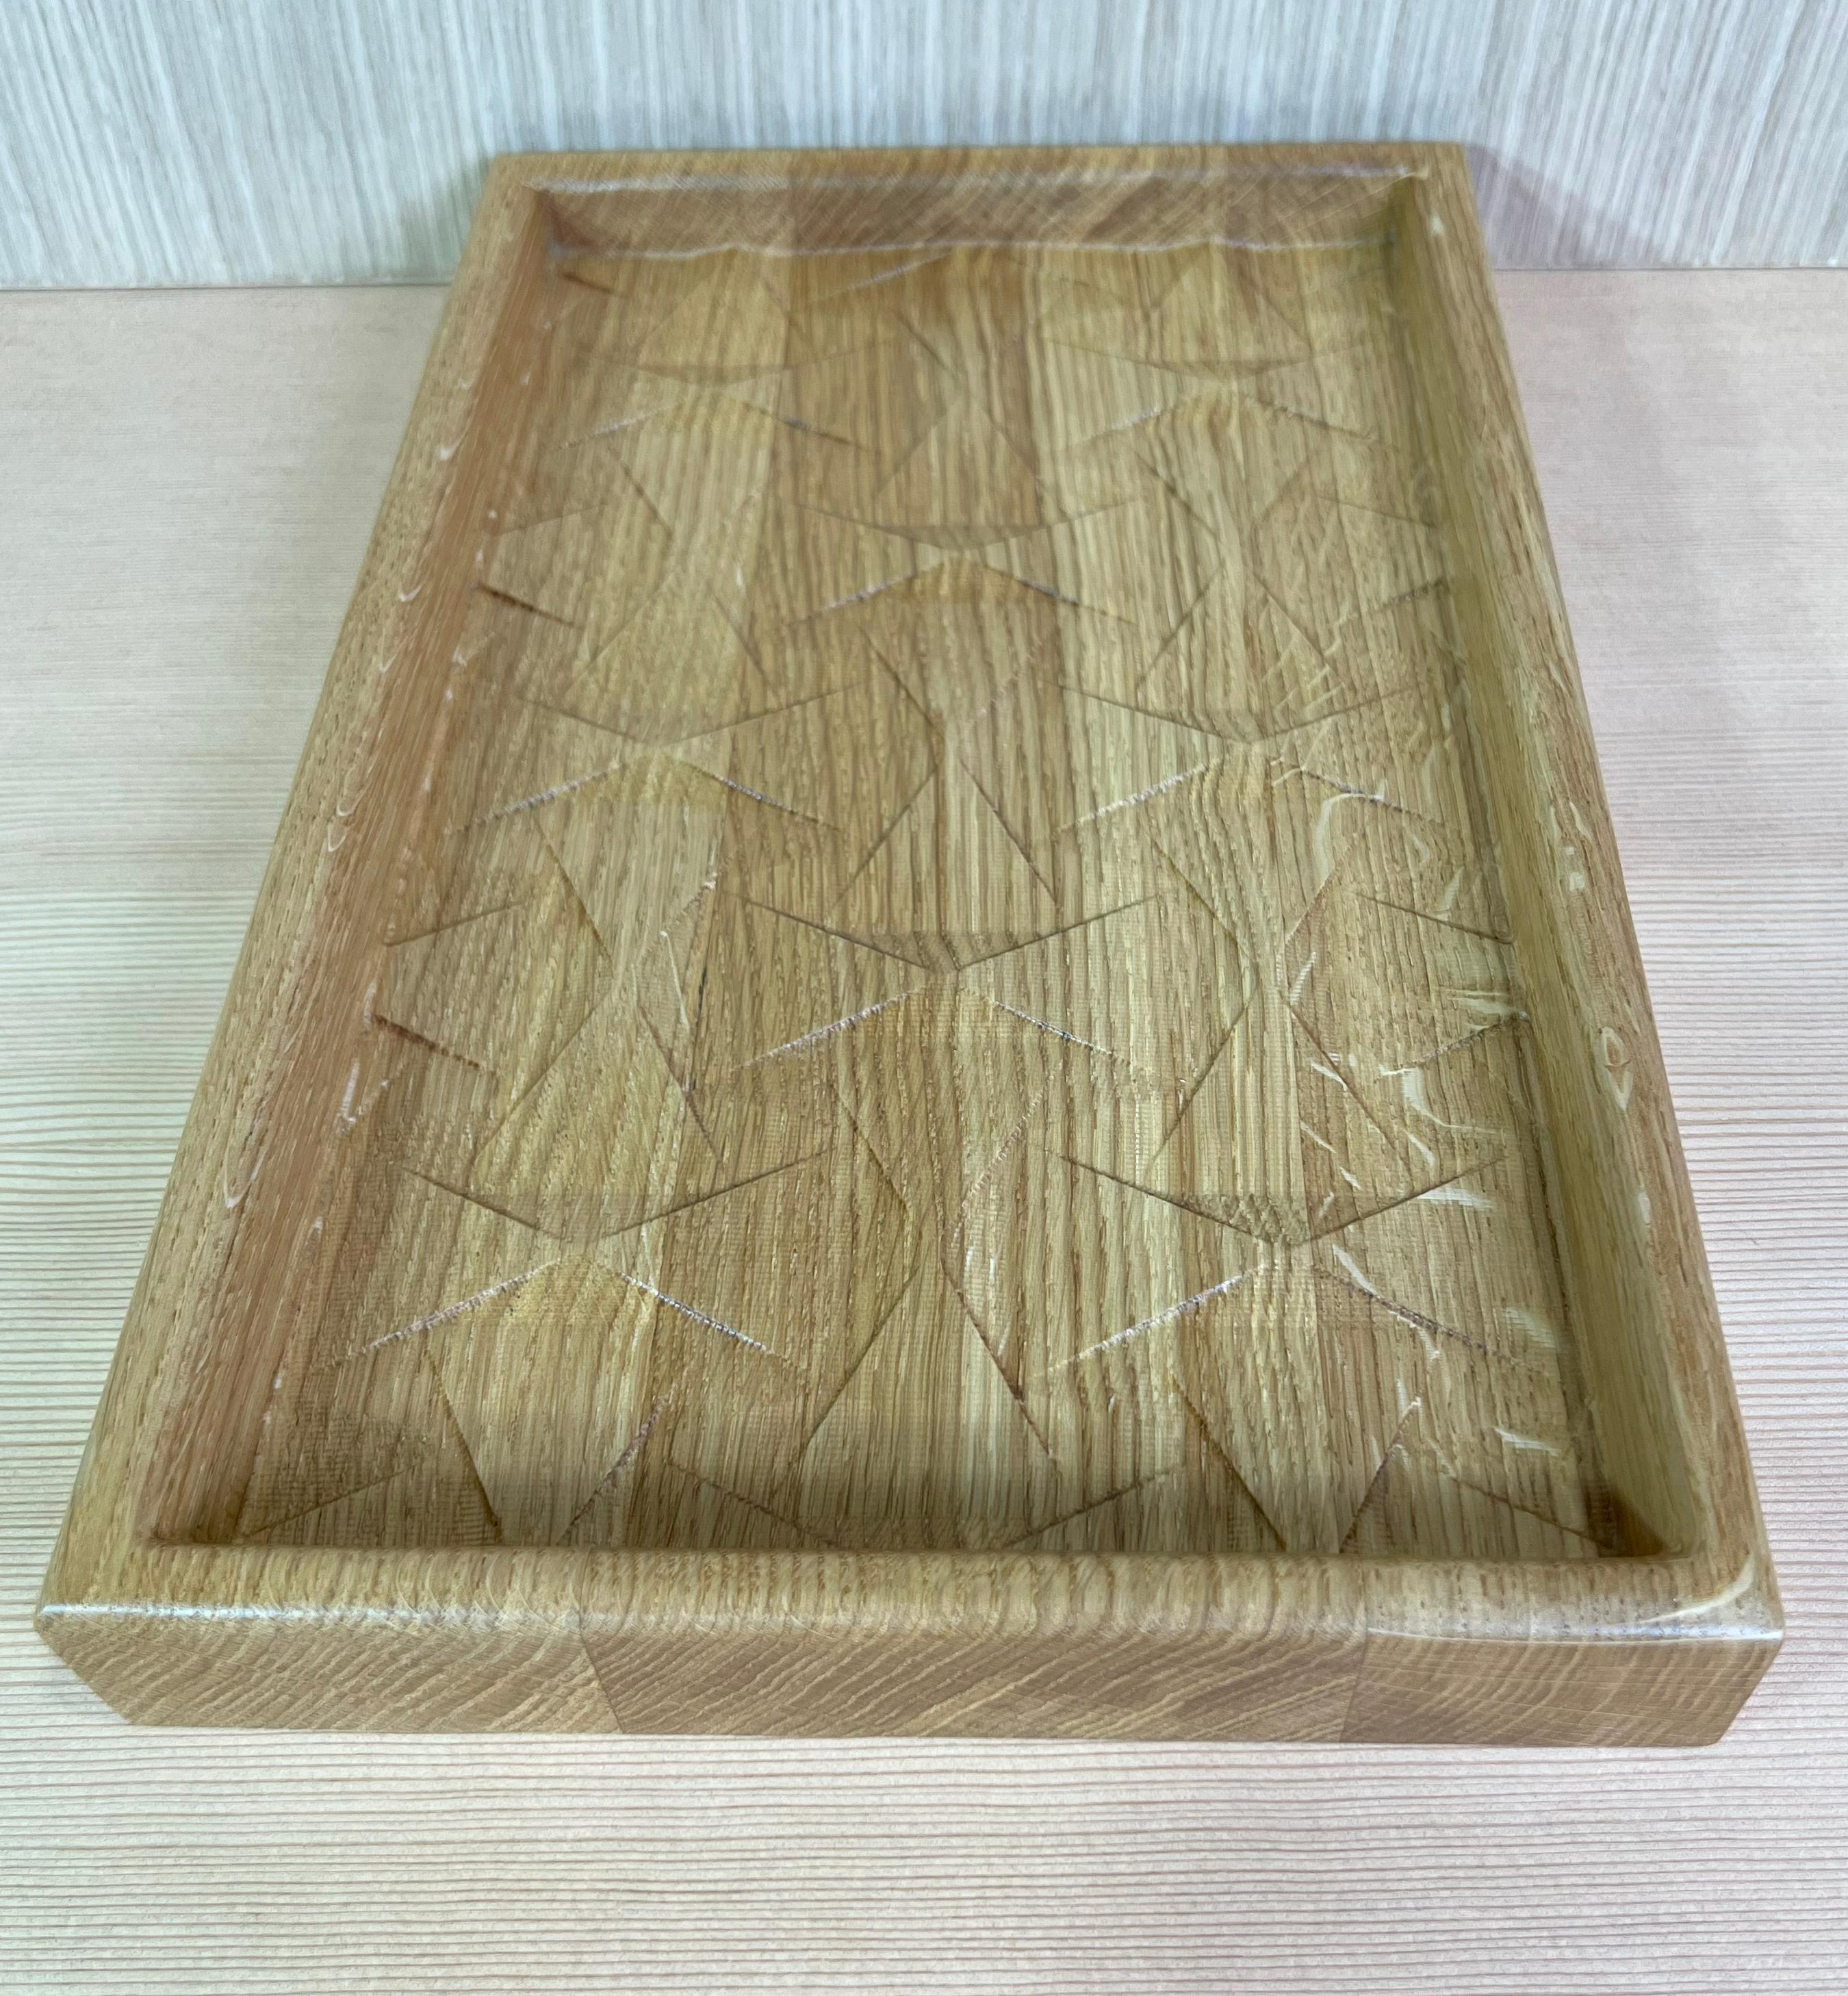 Contemporary Wood valet tray vanity tray catchall tray forhome office dresser kitchen instock For Sale